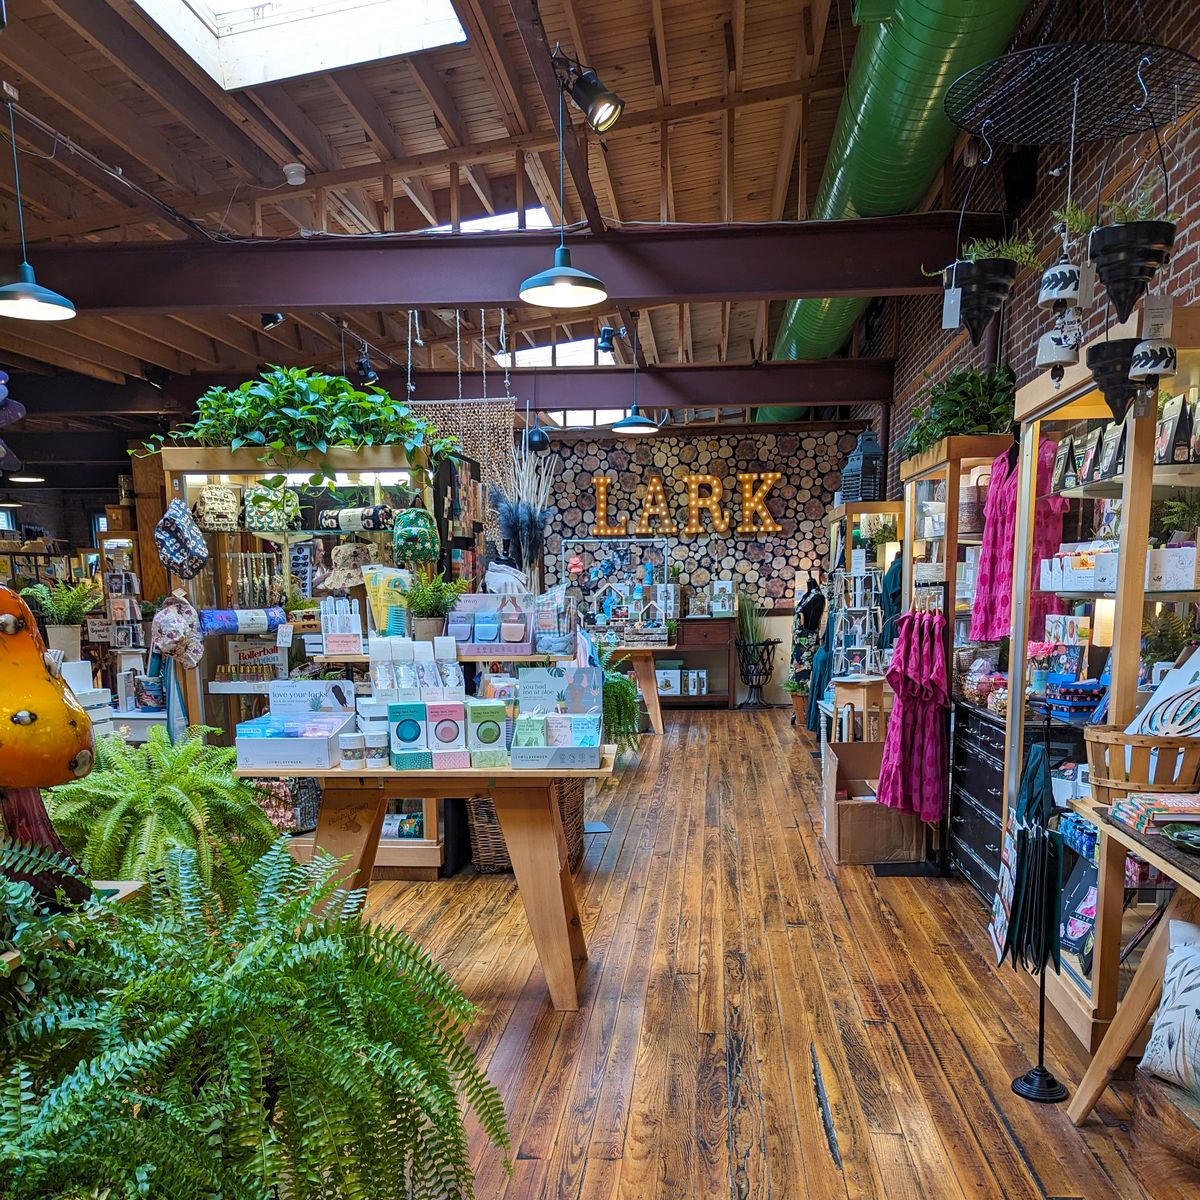 The interior of retail store "LARK". The store has a rustic, wooden interior with exposed beams on the ceiling. The shop features a wide variety of merchandise displayed on wooden tables and shelves, including plants, figurines, jewelry, candles, soaps, and other decorative items. A large illuminated "LARK" sign is visible on the back wall. The overall atmosphere seems cozy and inviting, with warm lighting and an abundance of greenery from the many potted plants throughout the store. The wooden floors and natural materials used in the displays contribute to the shop's charming, bohemian aesthetic.